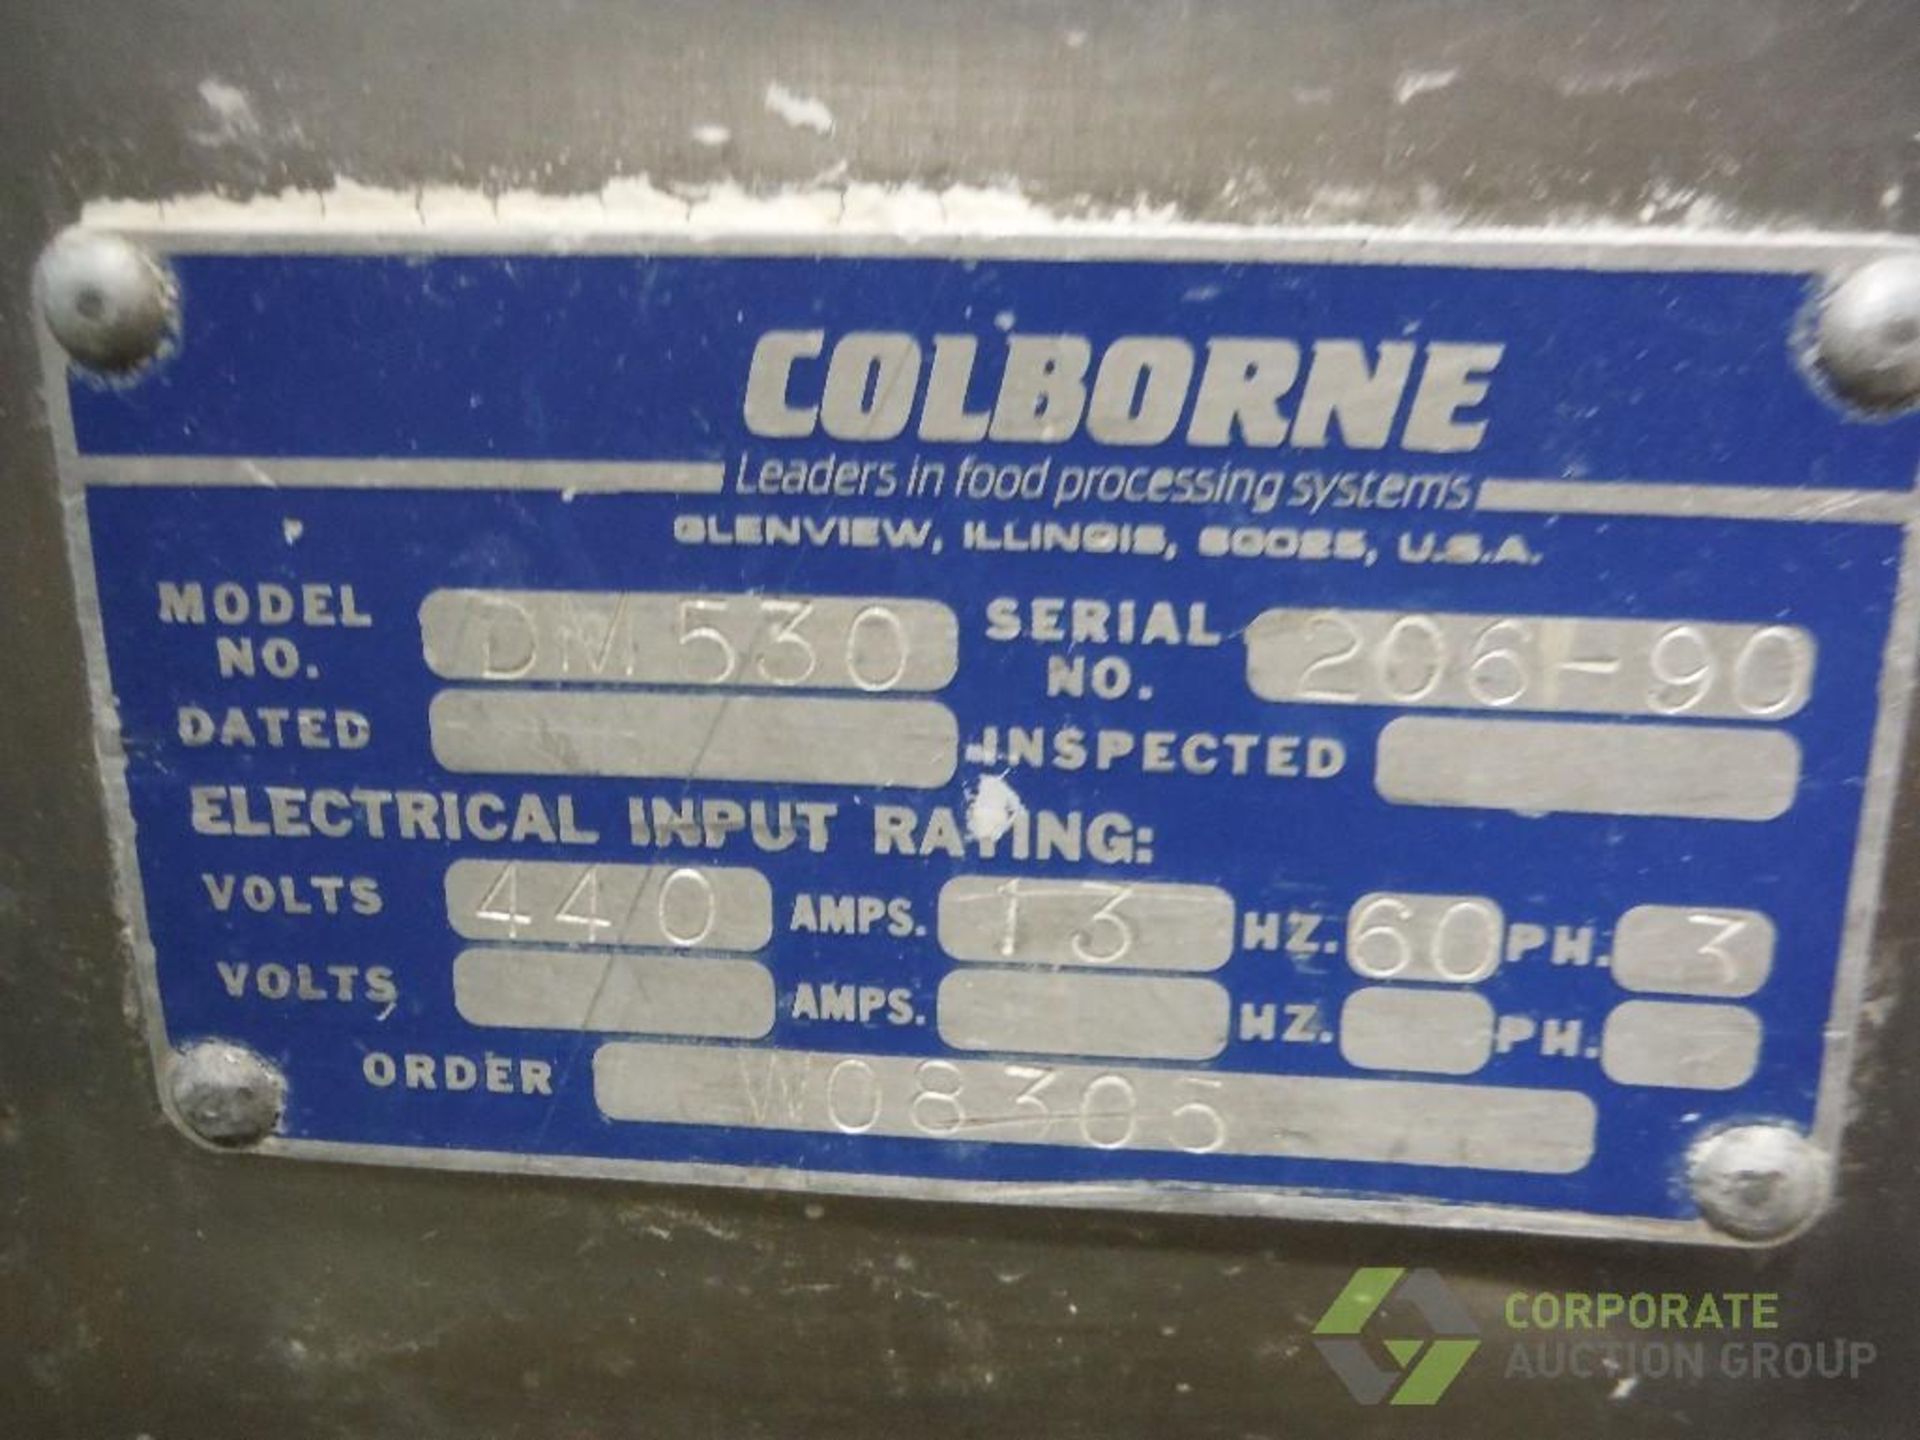 Colborne double arm mixer, Model DM530, SN 206-90, with SS mix bowl and cart, 44 in. dia. - Image 7 of 8